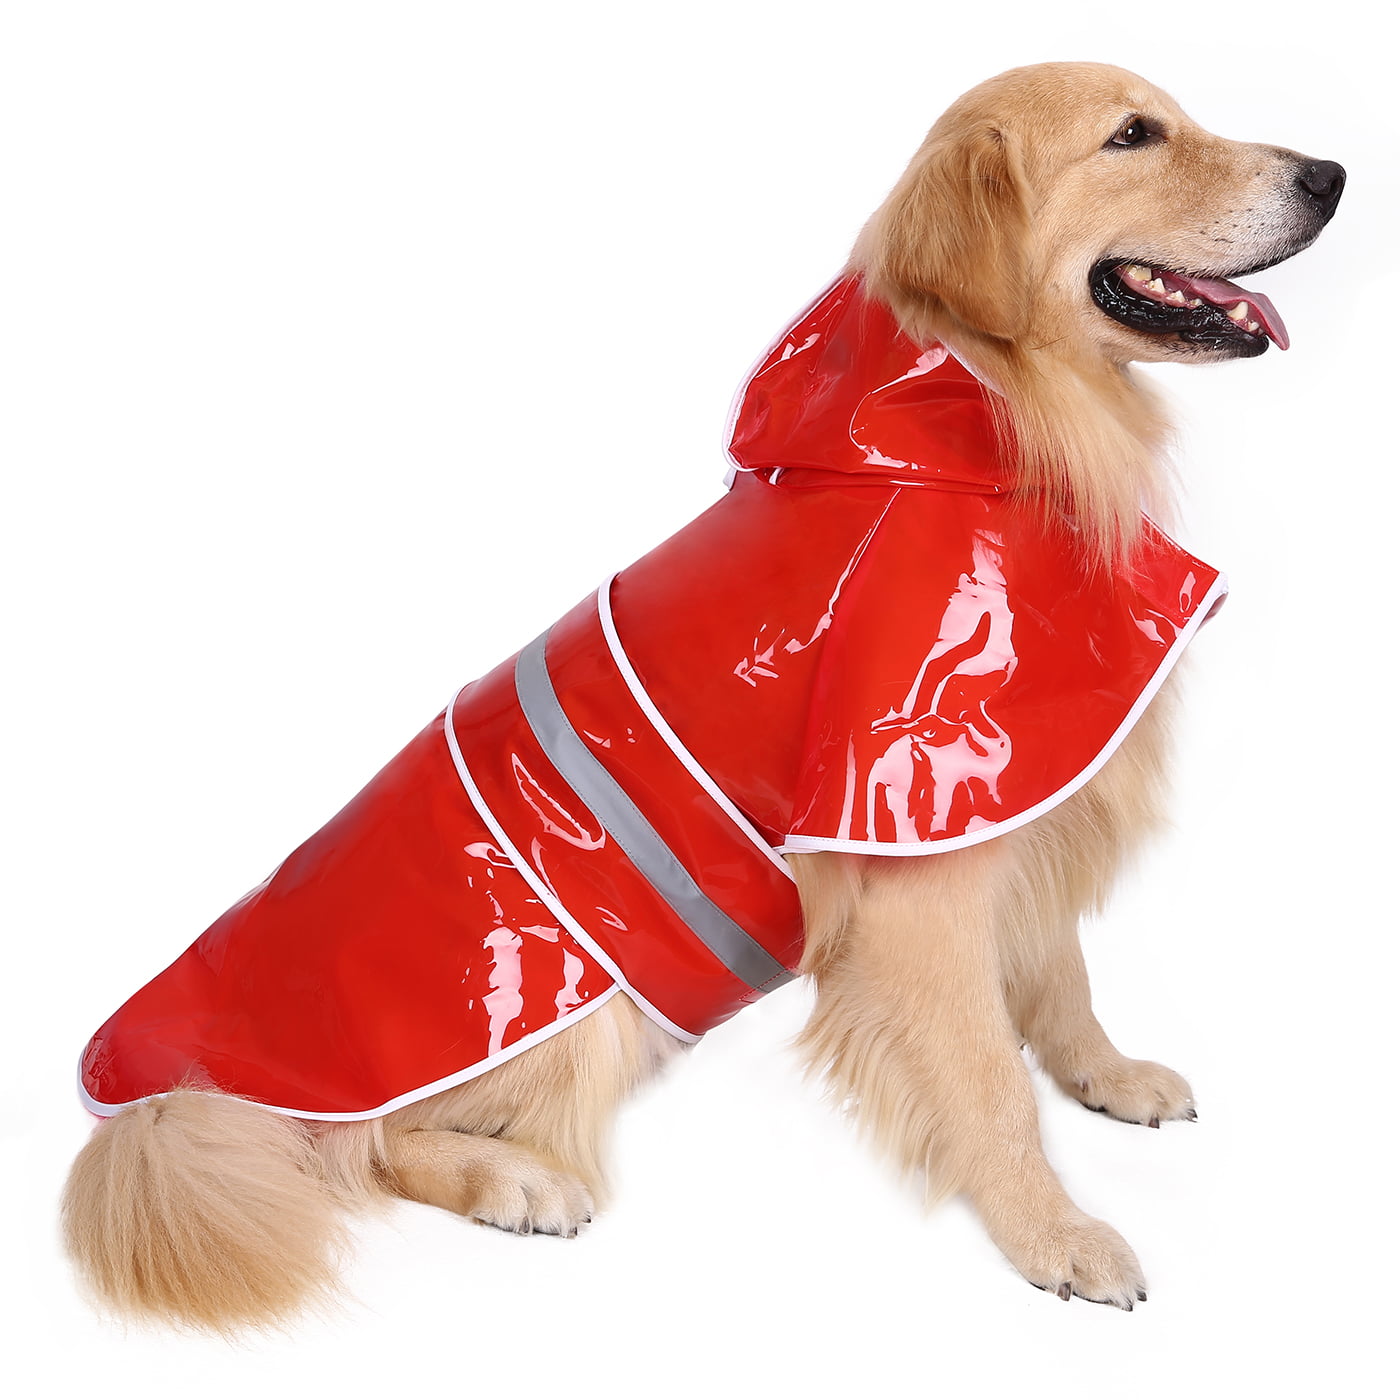 SMALLLEE_LUCKY_STORE Waterproof Dog Raincoat with Hood Pet Rain Jacket with Leash Hole Reflective Band Lightweight Adjustable Slicker Poncho Rainwear for Small Medium Large Dogs